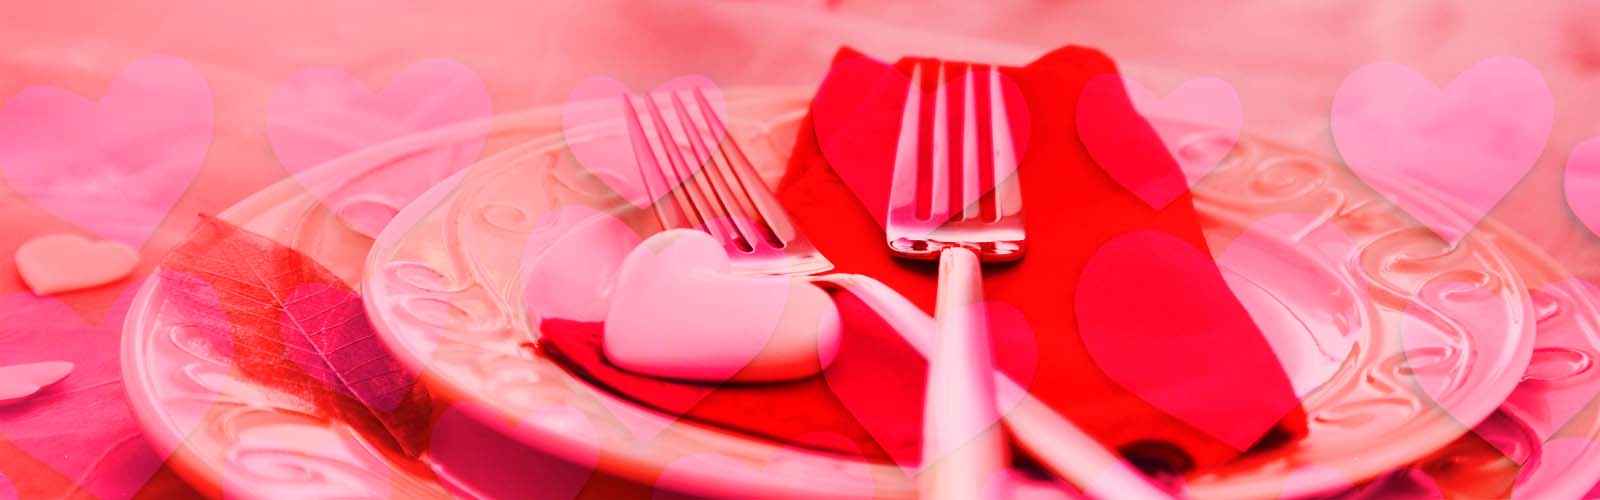 Pink and red dinner plate with hearts